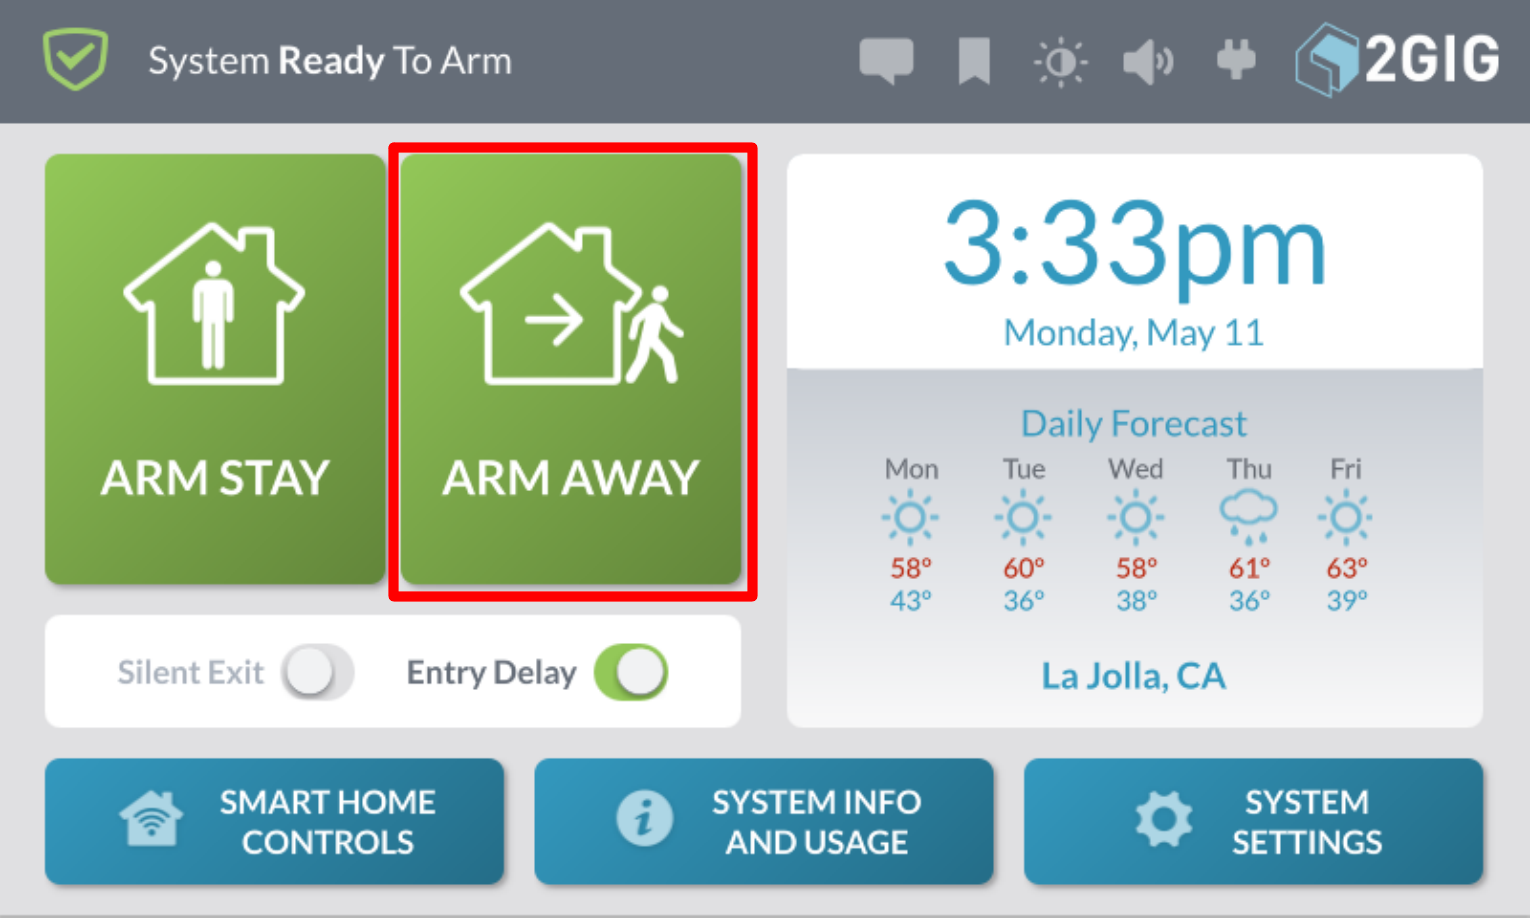 Image of home screen with "Arm Away" highlighted in red.